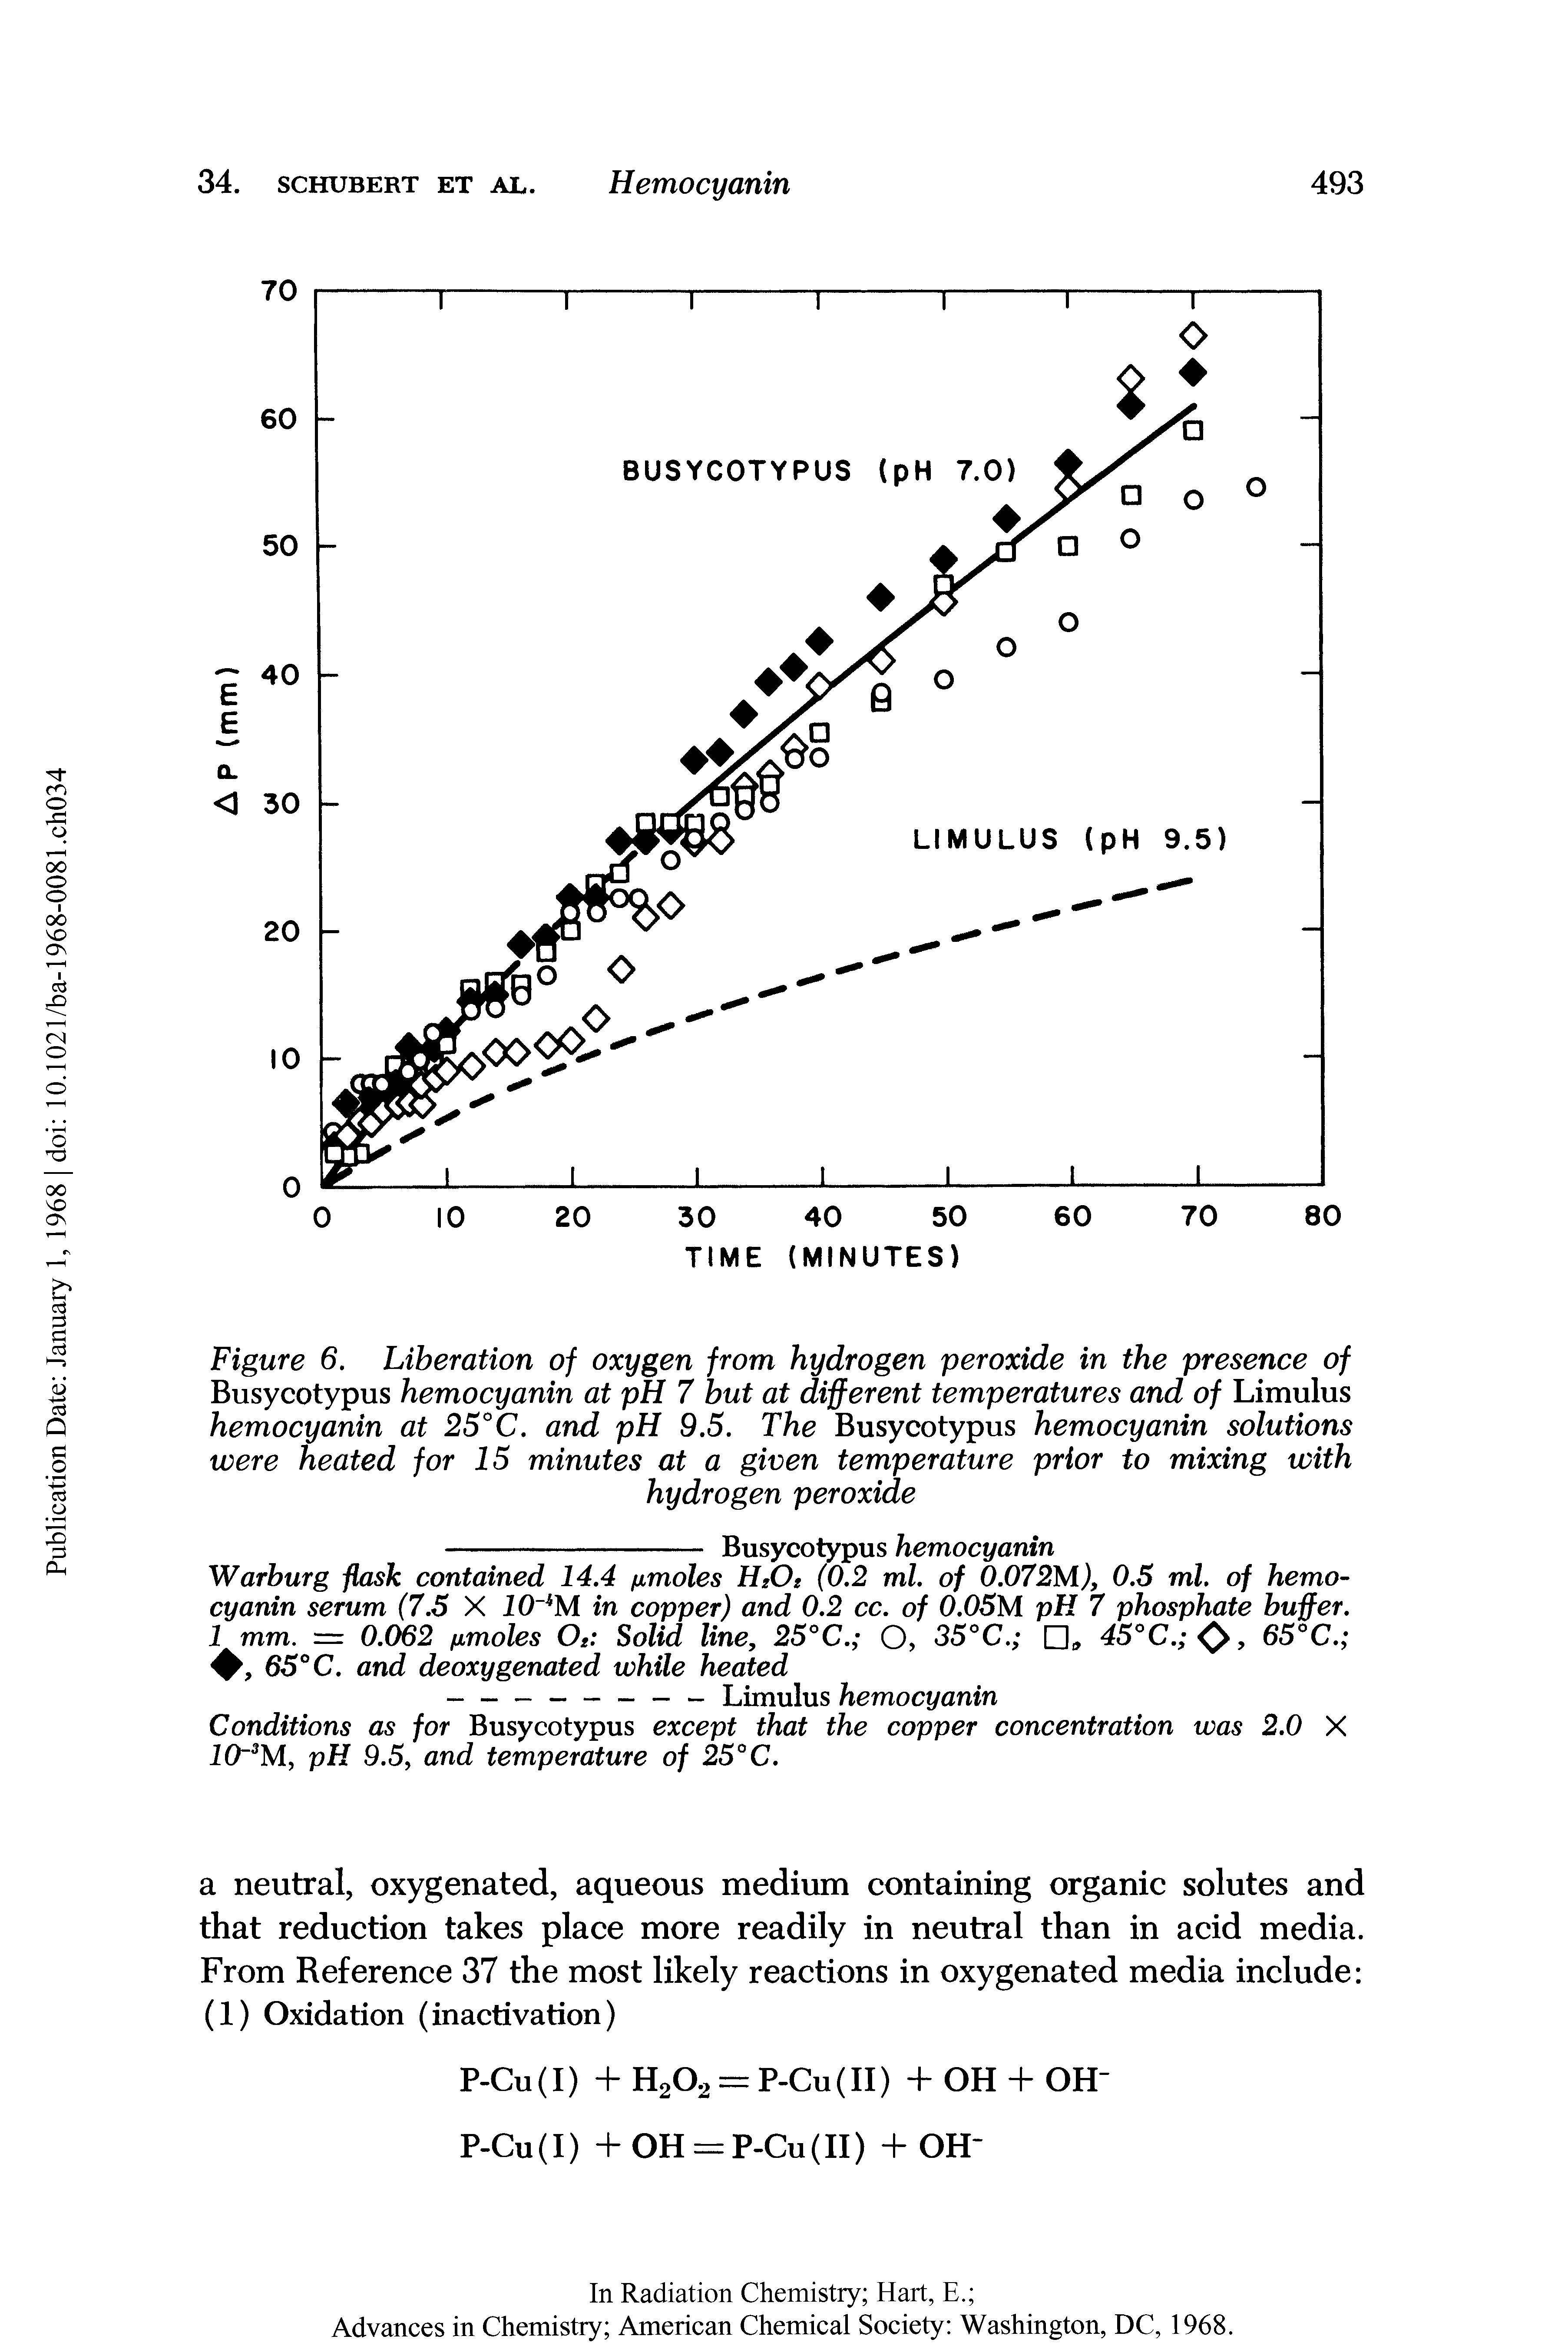 Figure 6. Liberation of oxygen from hydrogen peroxide in the presence of Busycotypus hemocyanin at pH 7 but at different temperatures and of Limulus hemocyanin at 25°C. and pH 9.5. The Busycotypus hemocyanin solutions were heated for 15 minutes at a given temperature prior to mixing with...